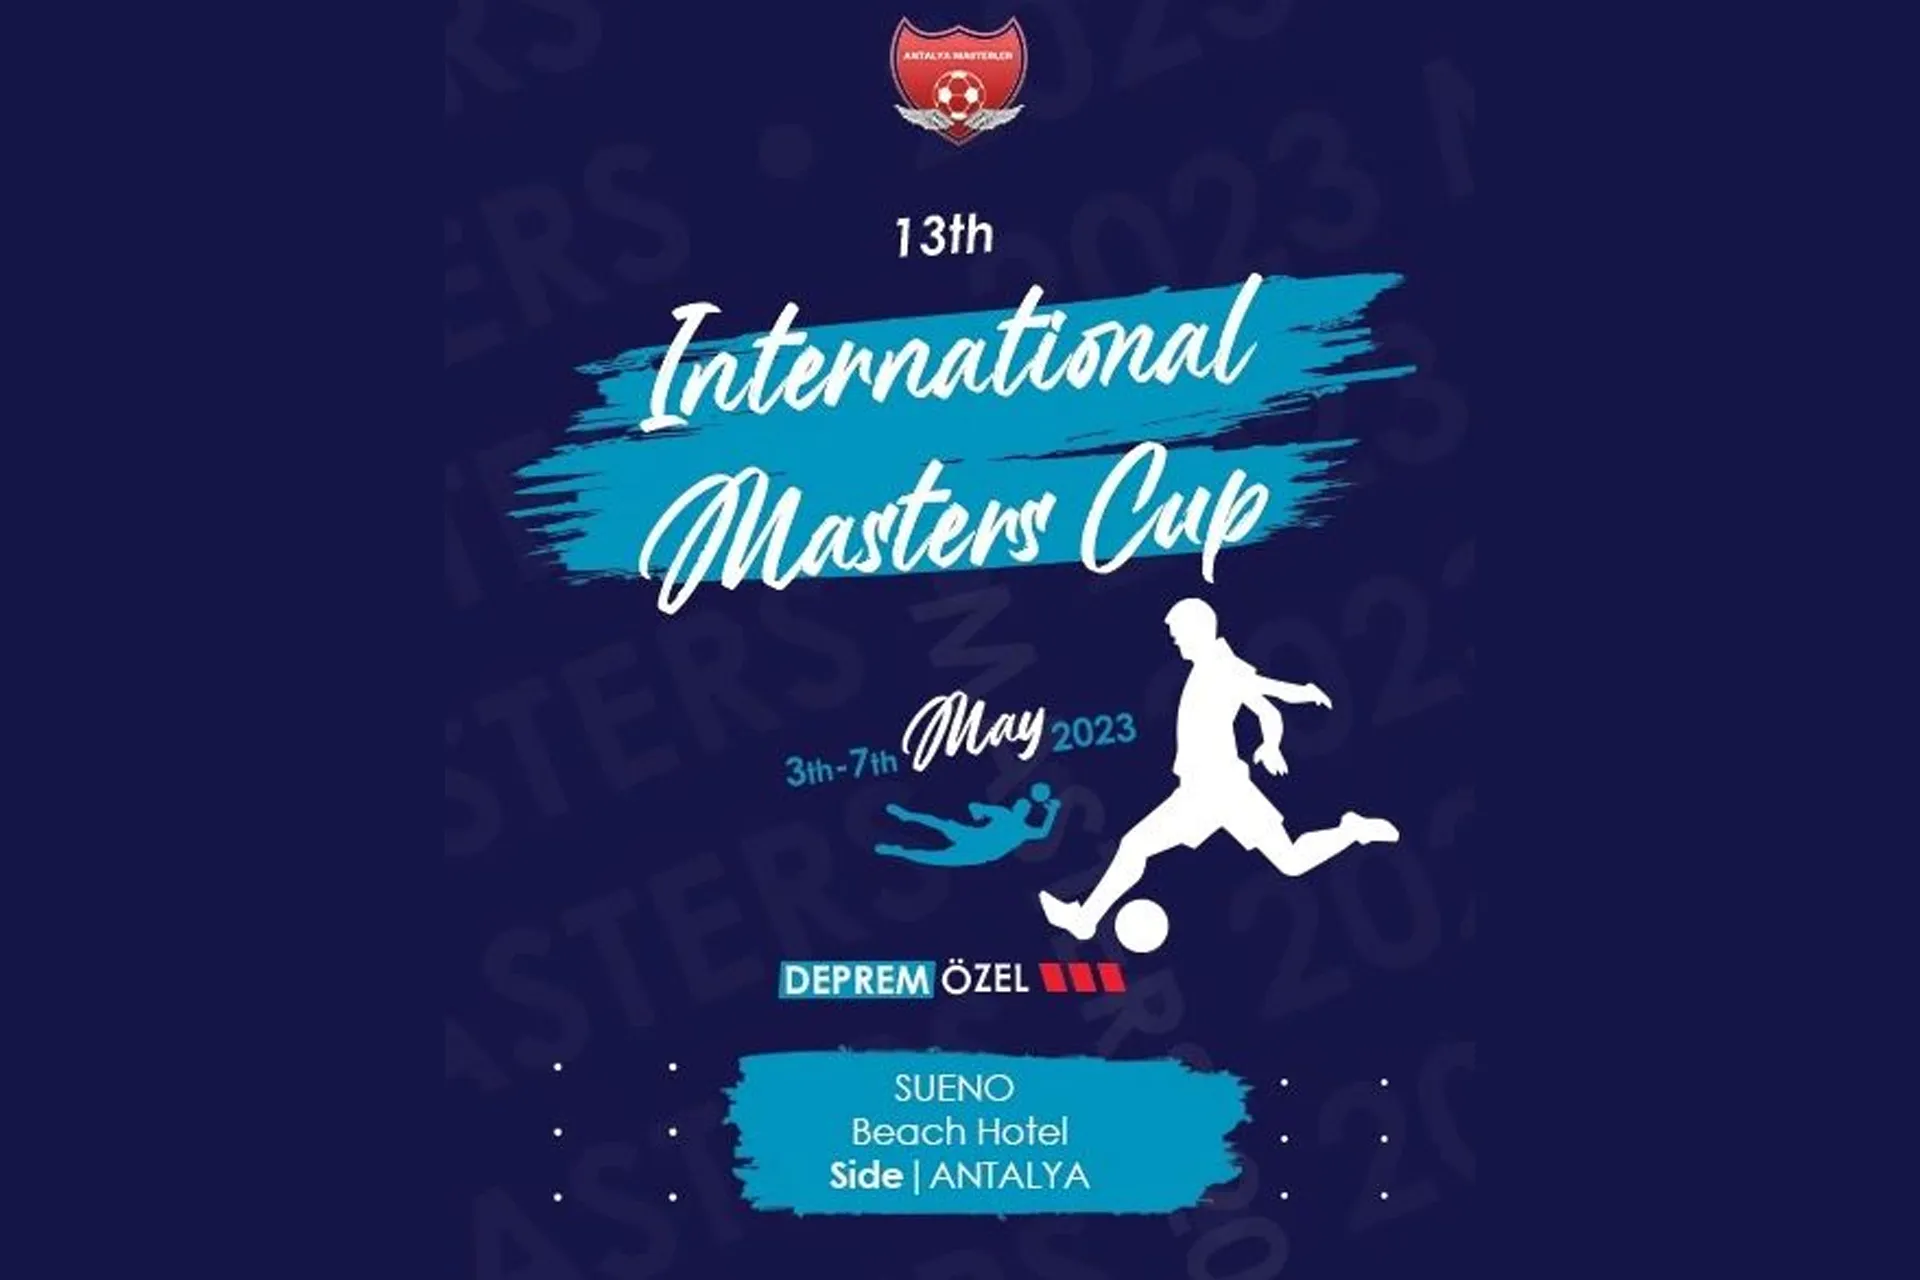 The 13th International Masters Cup Organization